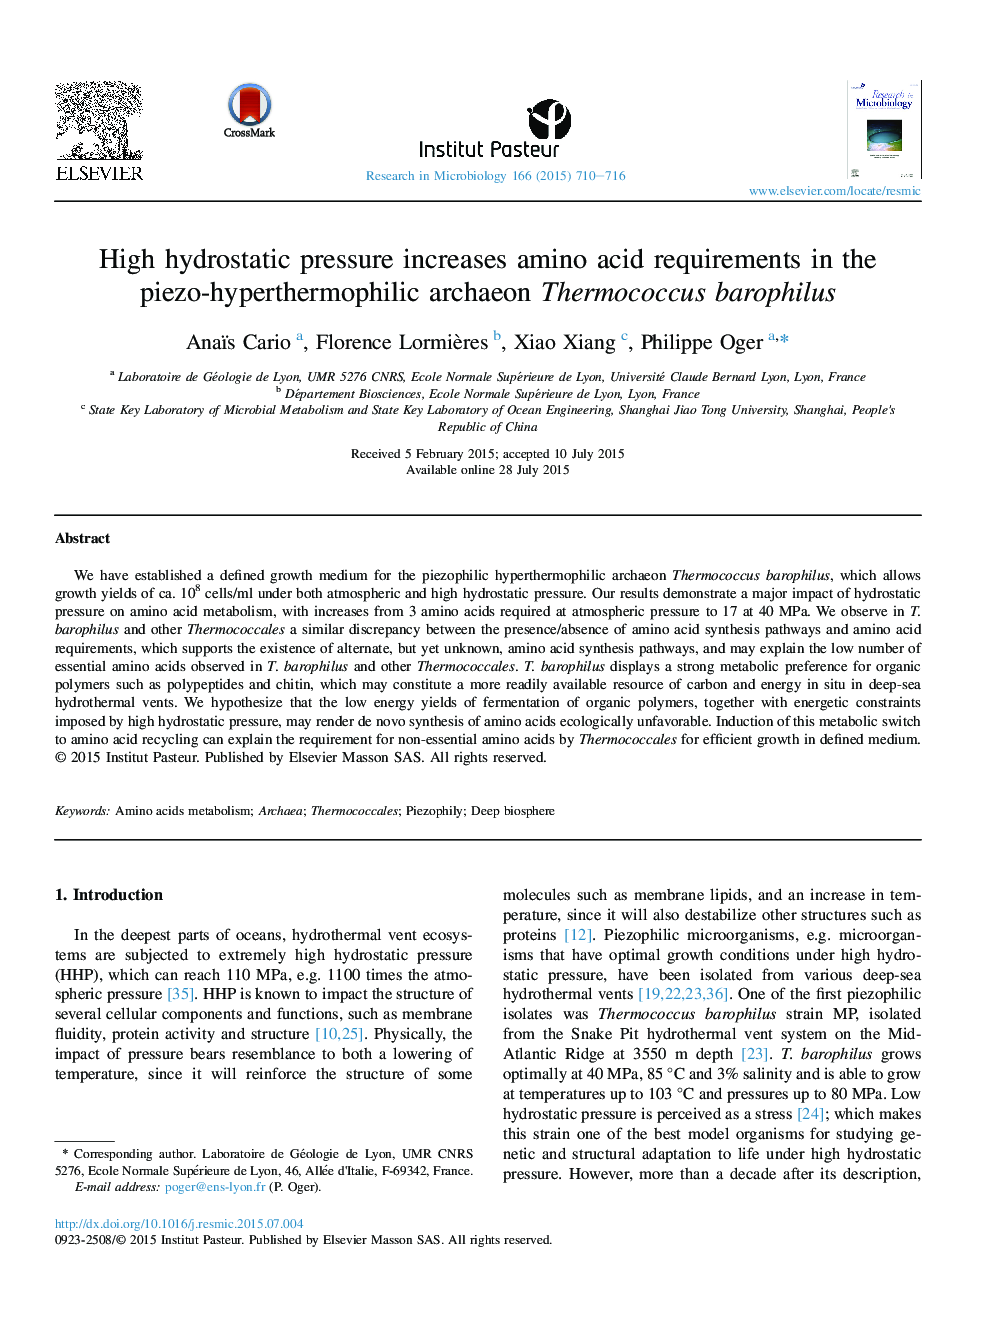 High hydrostatic pressure increases amino acid requirements in the piezo-hyperthermophilic archaeon Thermococcus barophilus